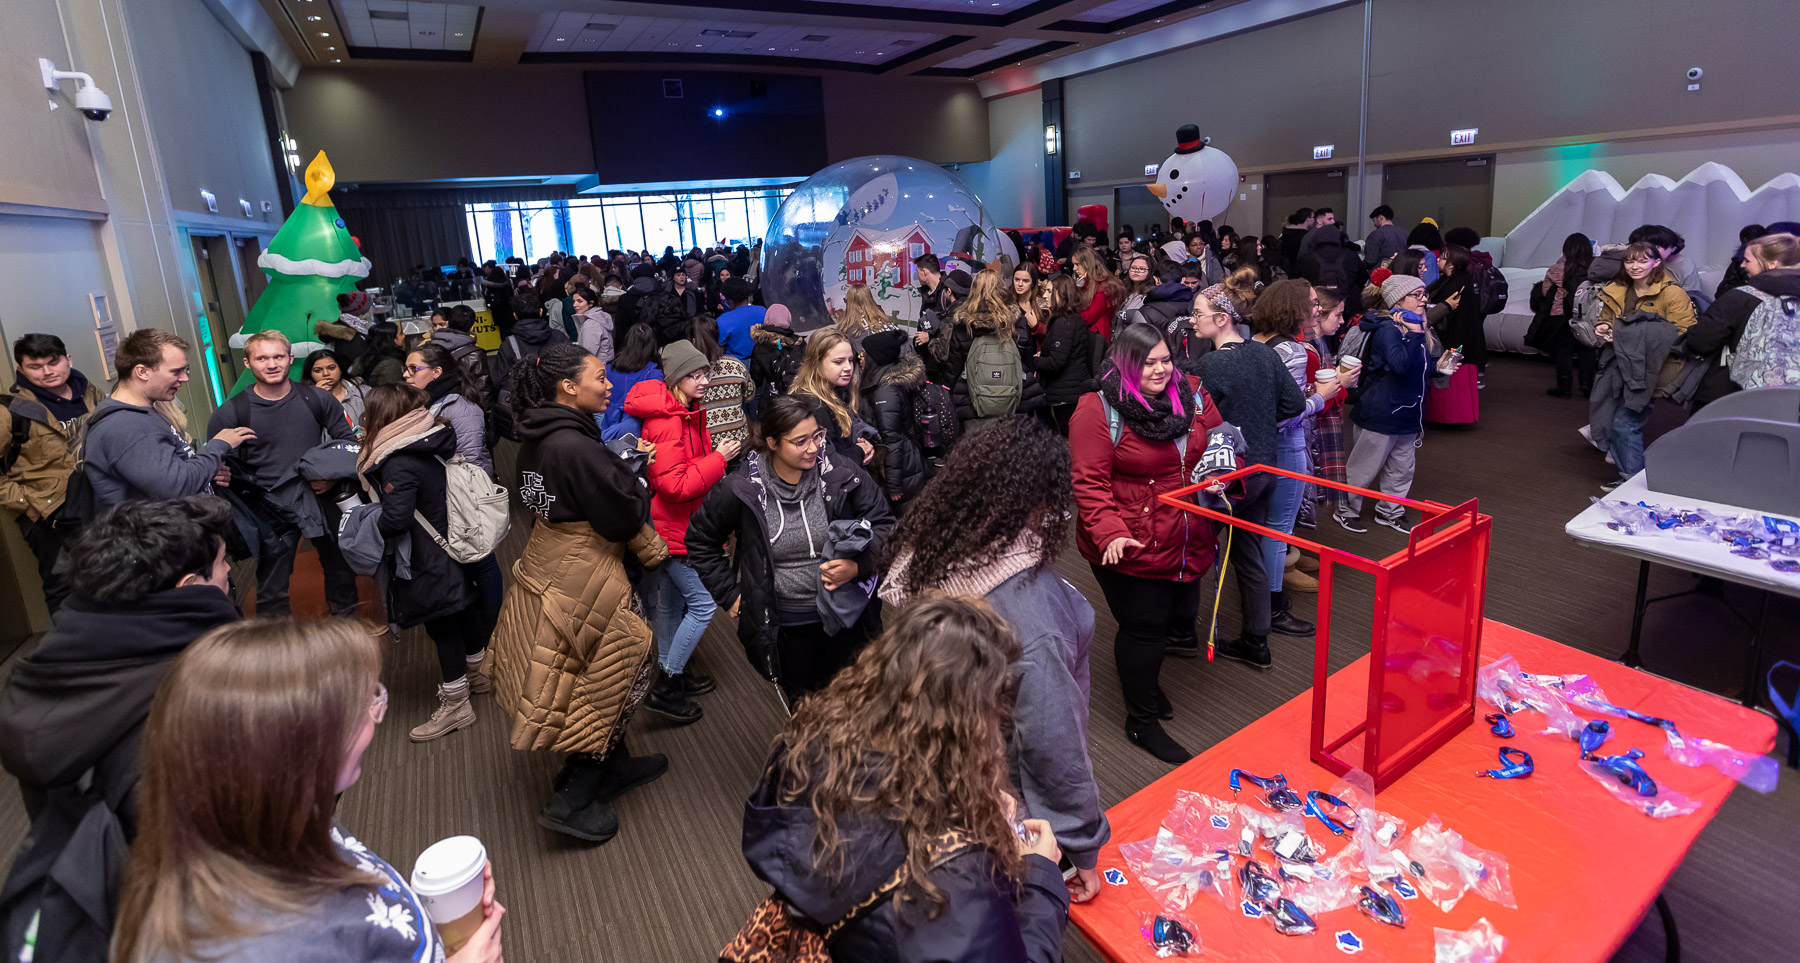 DePaul students take part in the many available crafts, games and activities during the second-annual Ugly Sweater Party in the Lincoln Park Student Center. (DePaul University/Jeff Carrion)